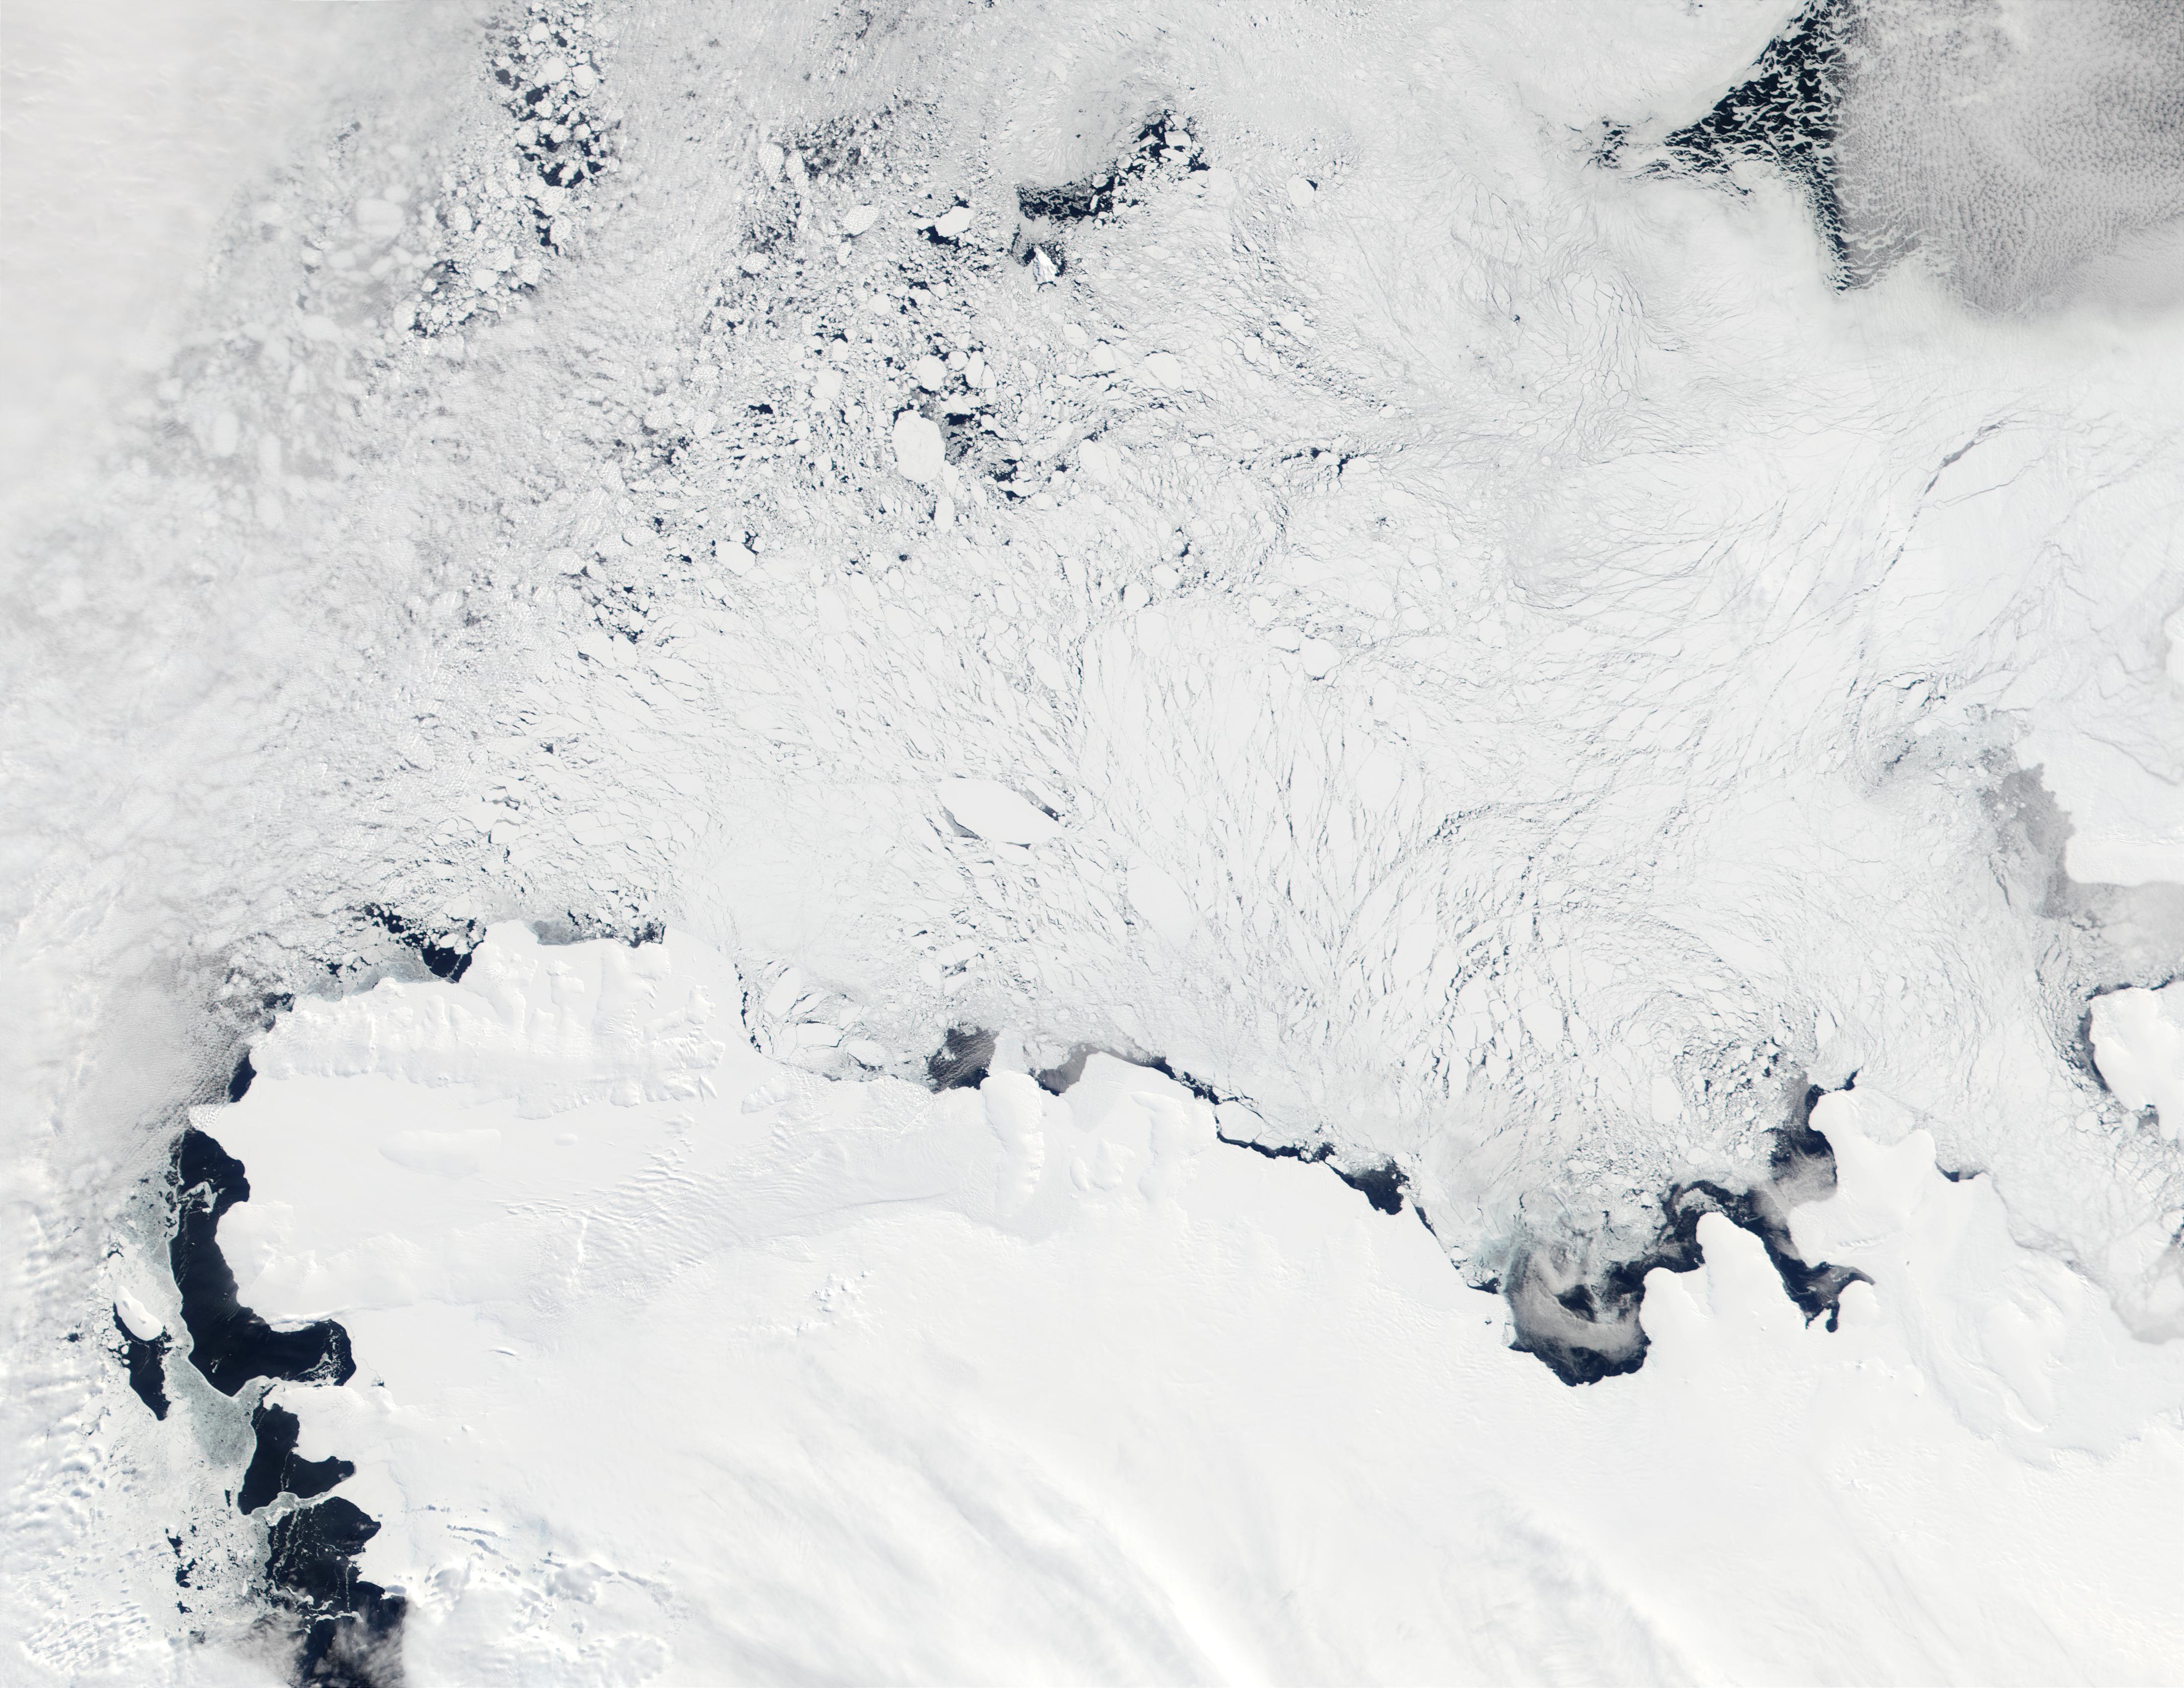 Eights Coast, Bryan Coast, and Bellingshausen Sea, Antarctica - related image preview